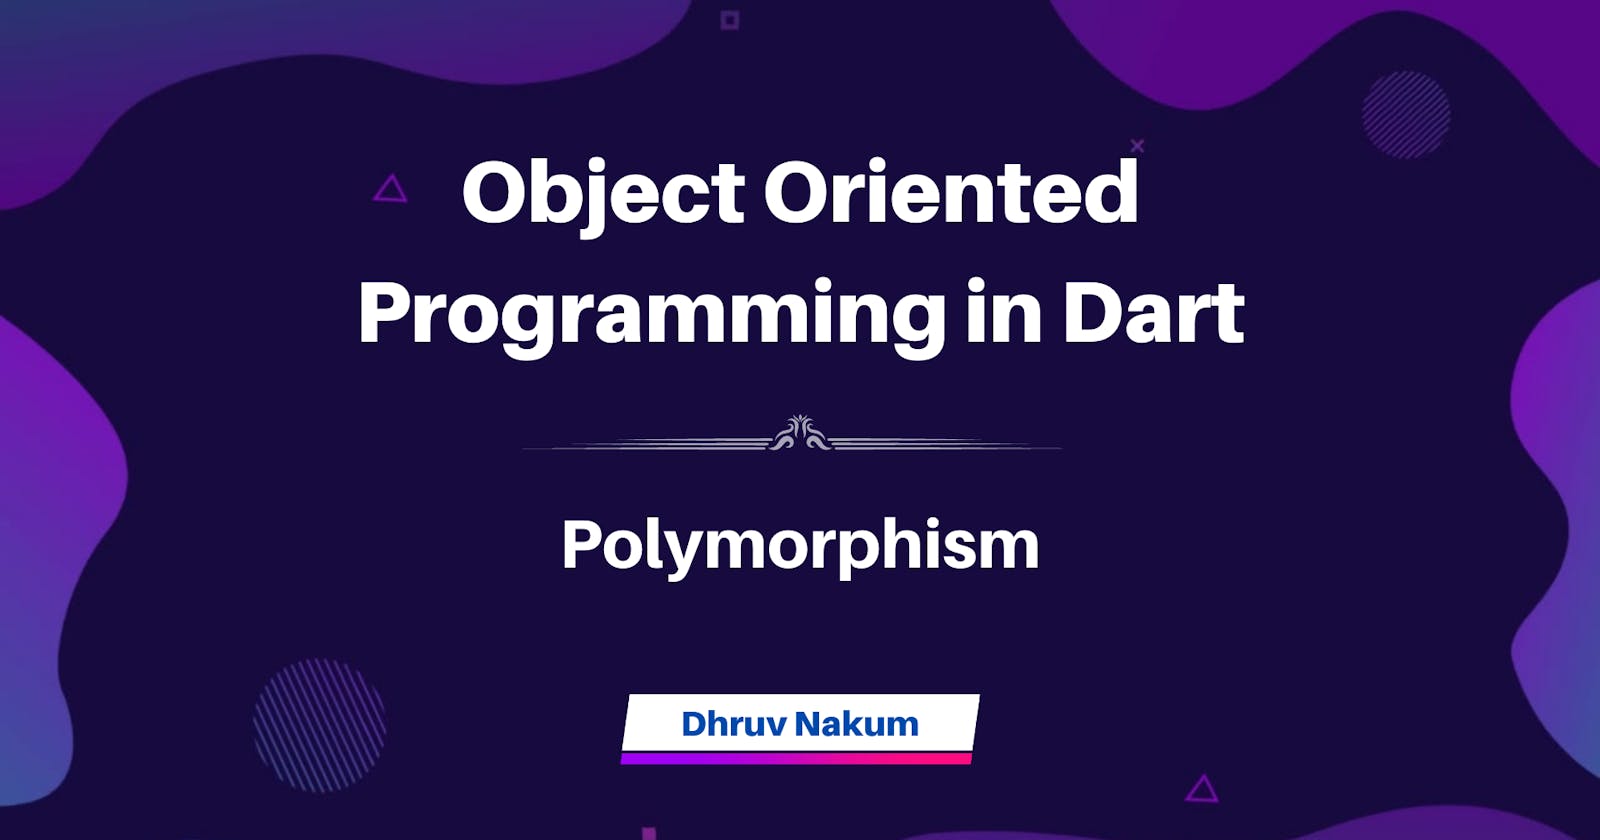 Object Oriented Programming in Dart: Polymorphism